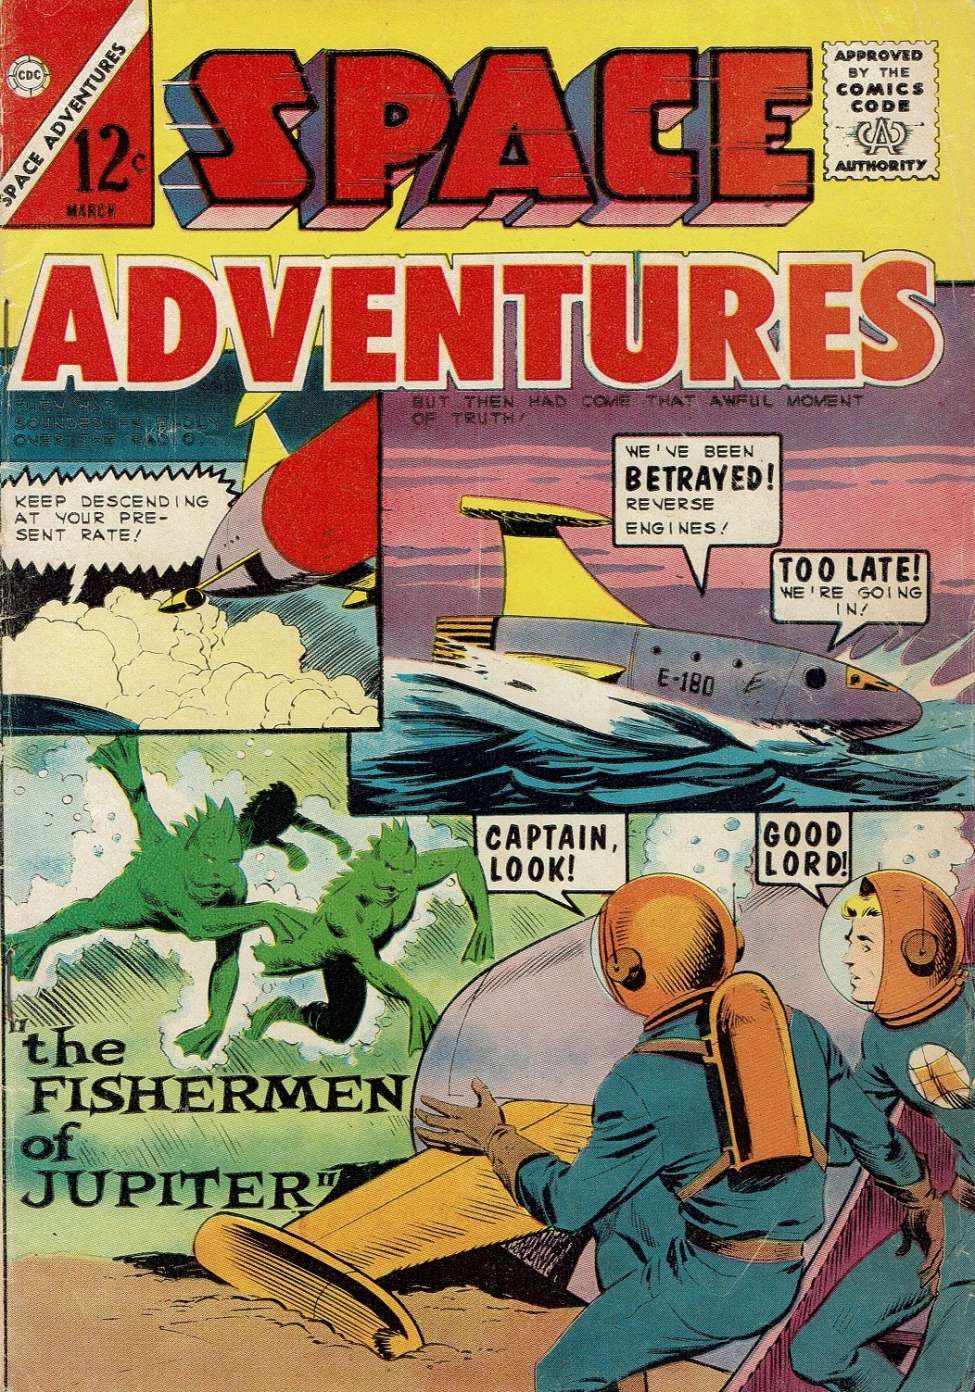 Book Cover For Space Adventures 56 - Version 1